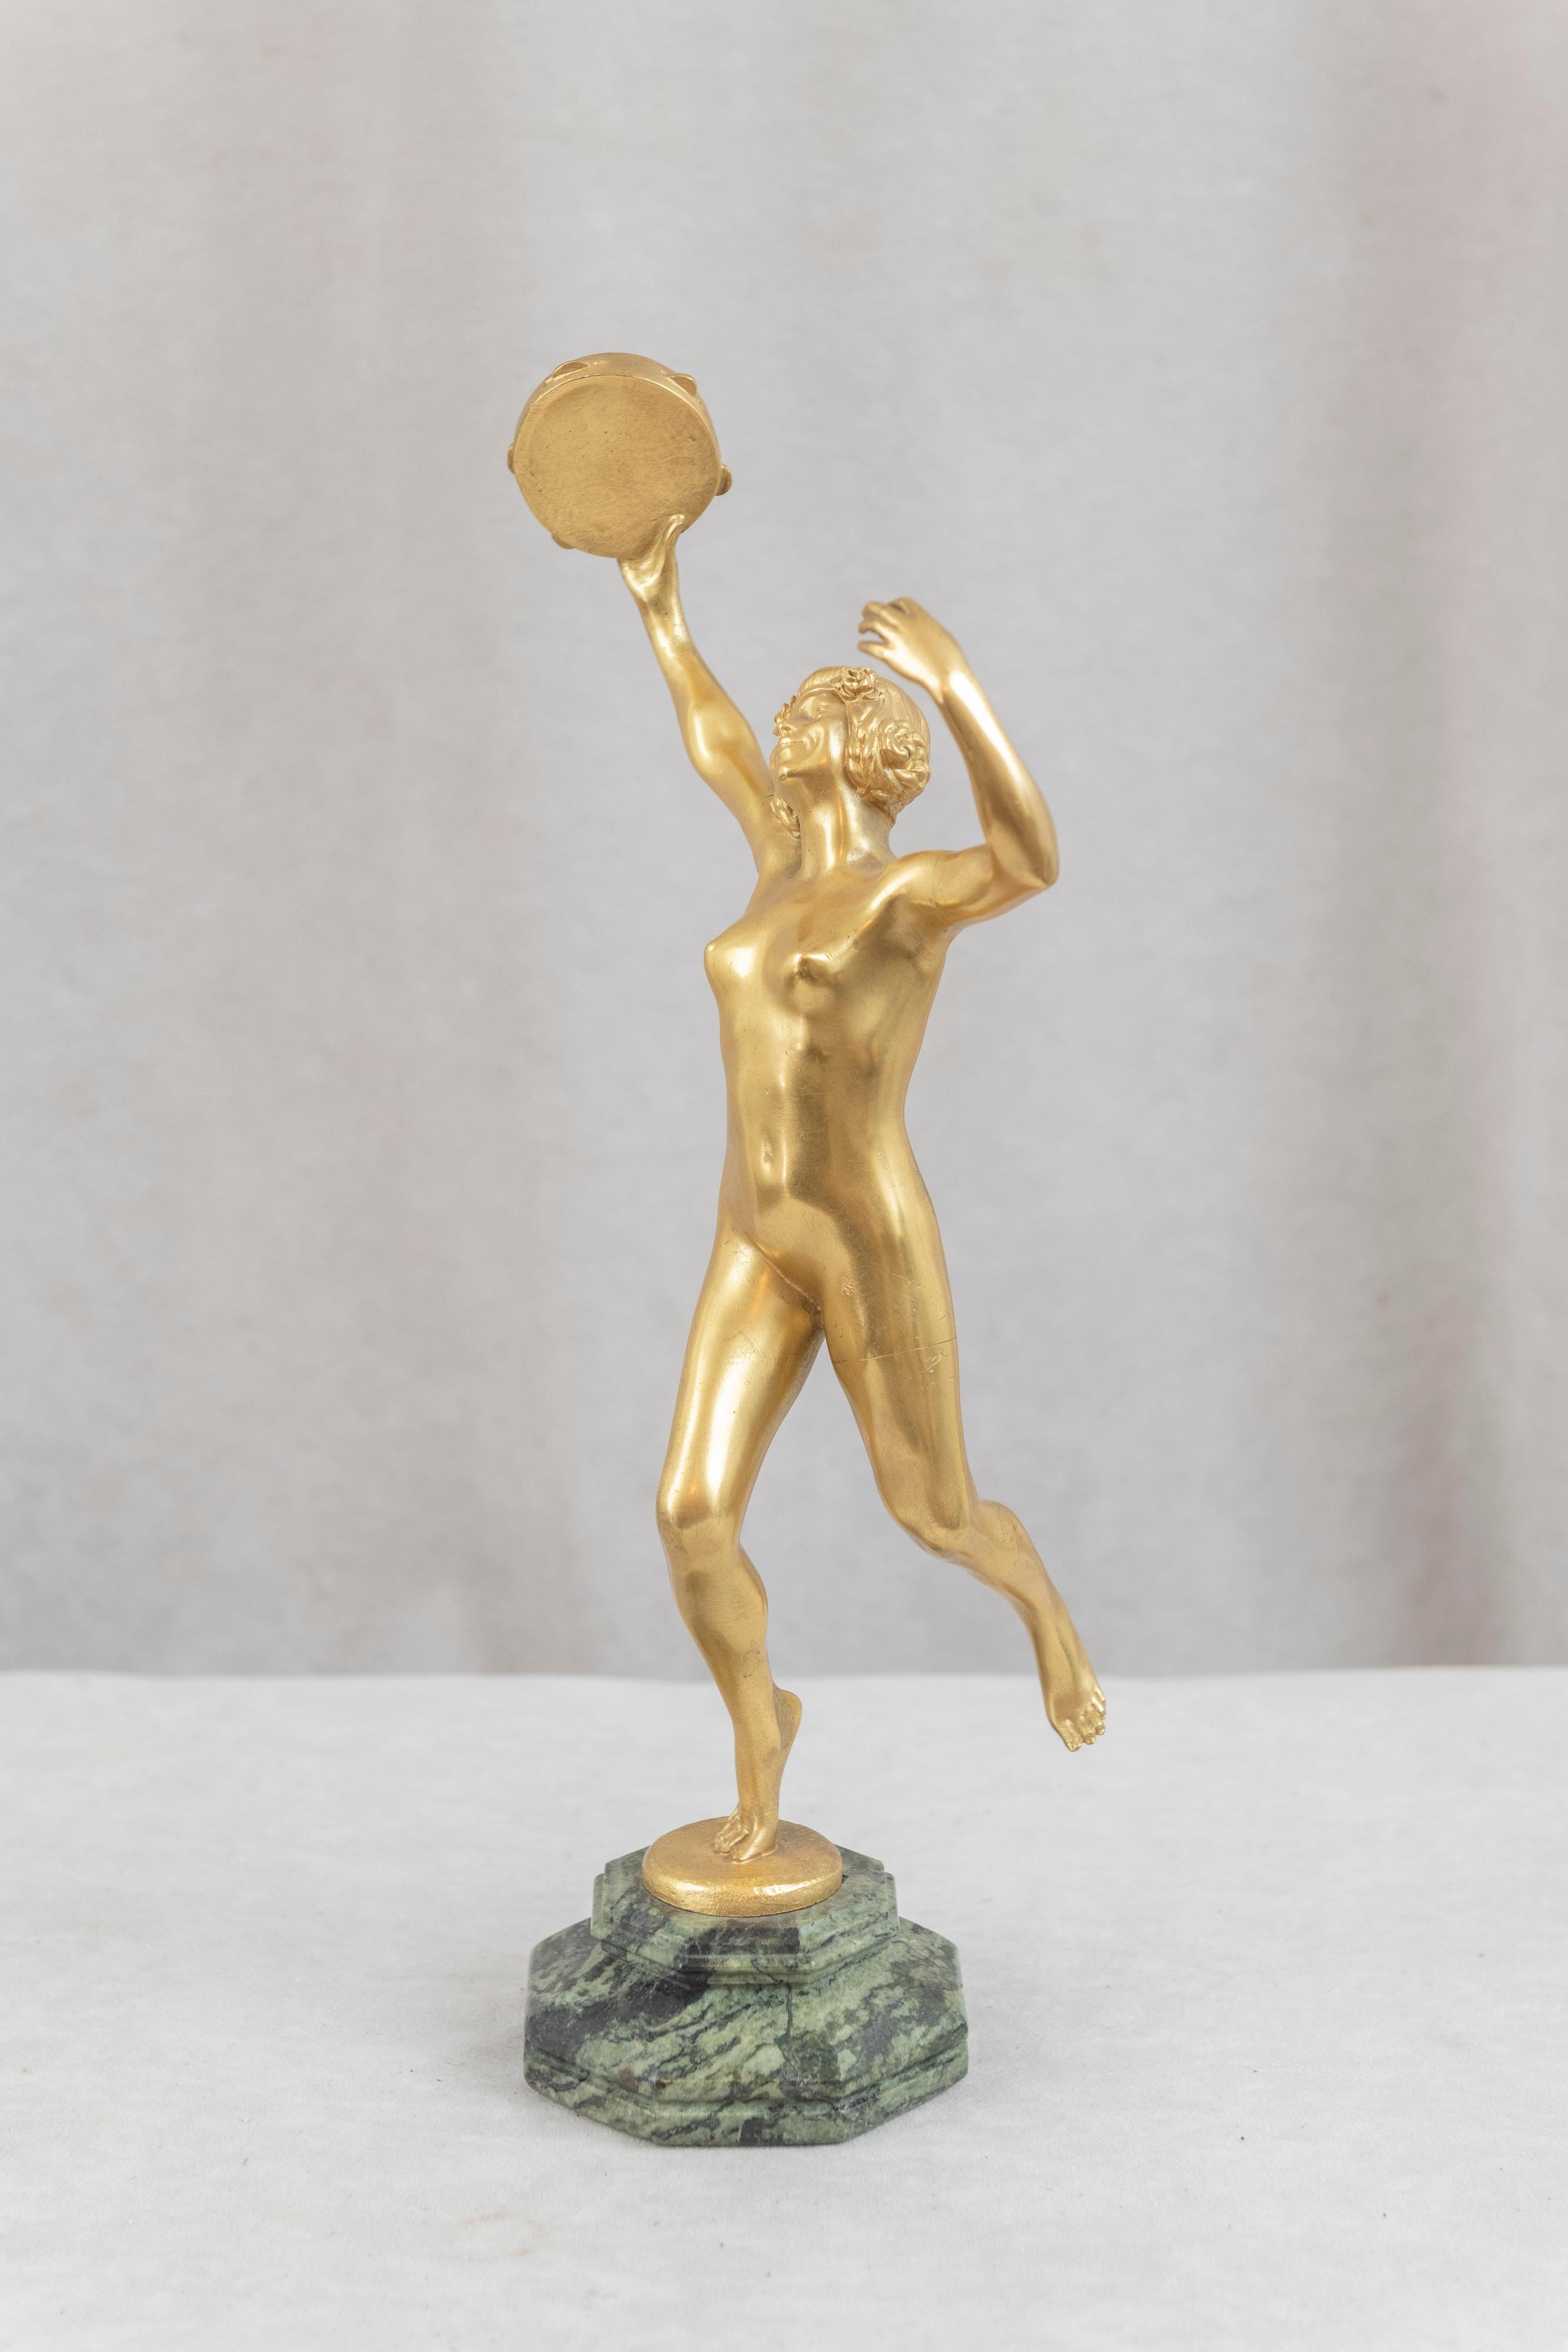 A graceful gilt bronze period Art Deco figure of a nude young lady holding a tambourine as she dances. Mounted on a colorful marble base and signed by the noted French artist Eugène Désiré Piron (1875-1928). The signature was abbreviated to just E.